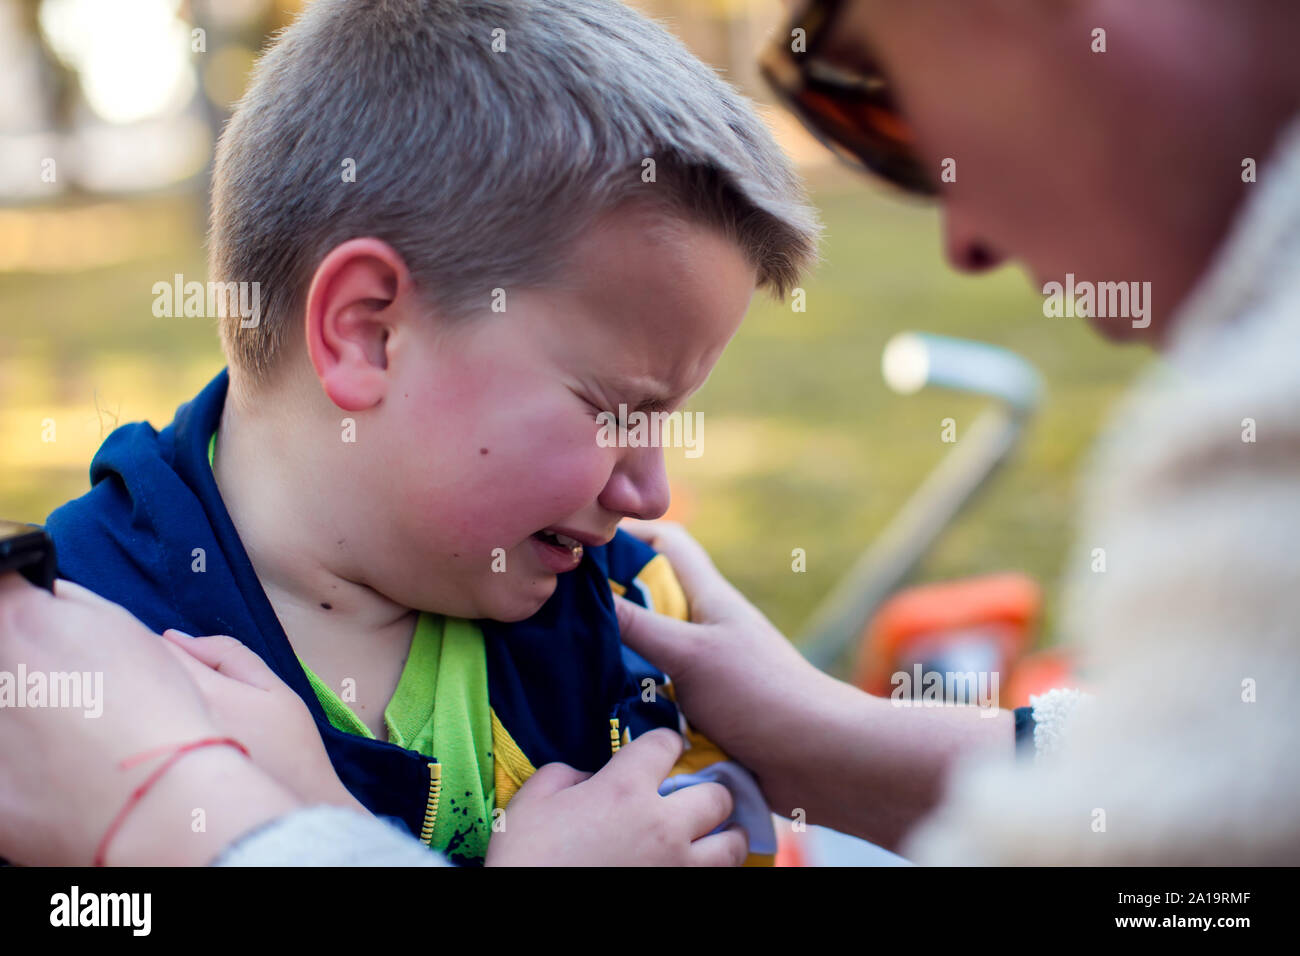 Boy crying and mom trying to calm him down. Children, parents and emotions concept Stock Photo